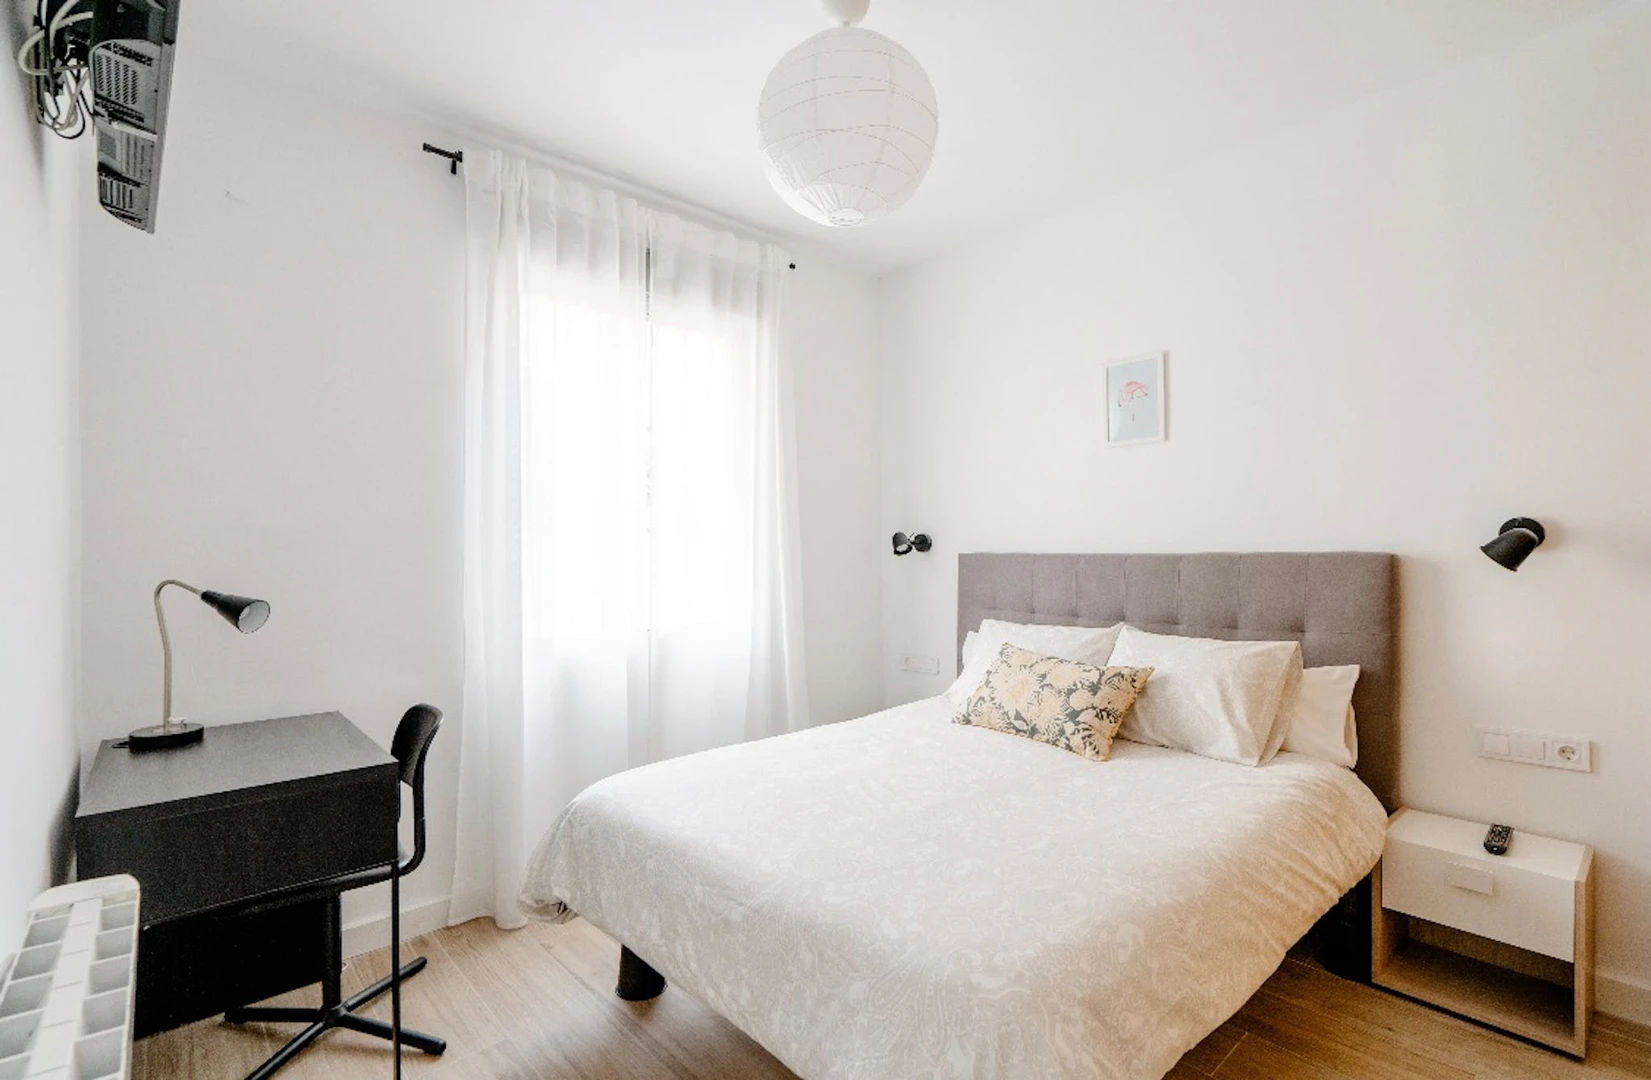 Room for rent with double bed Getafe